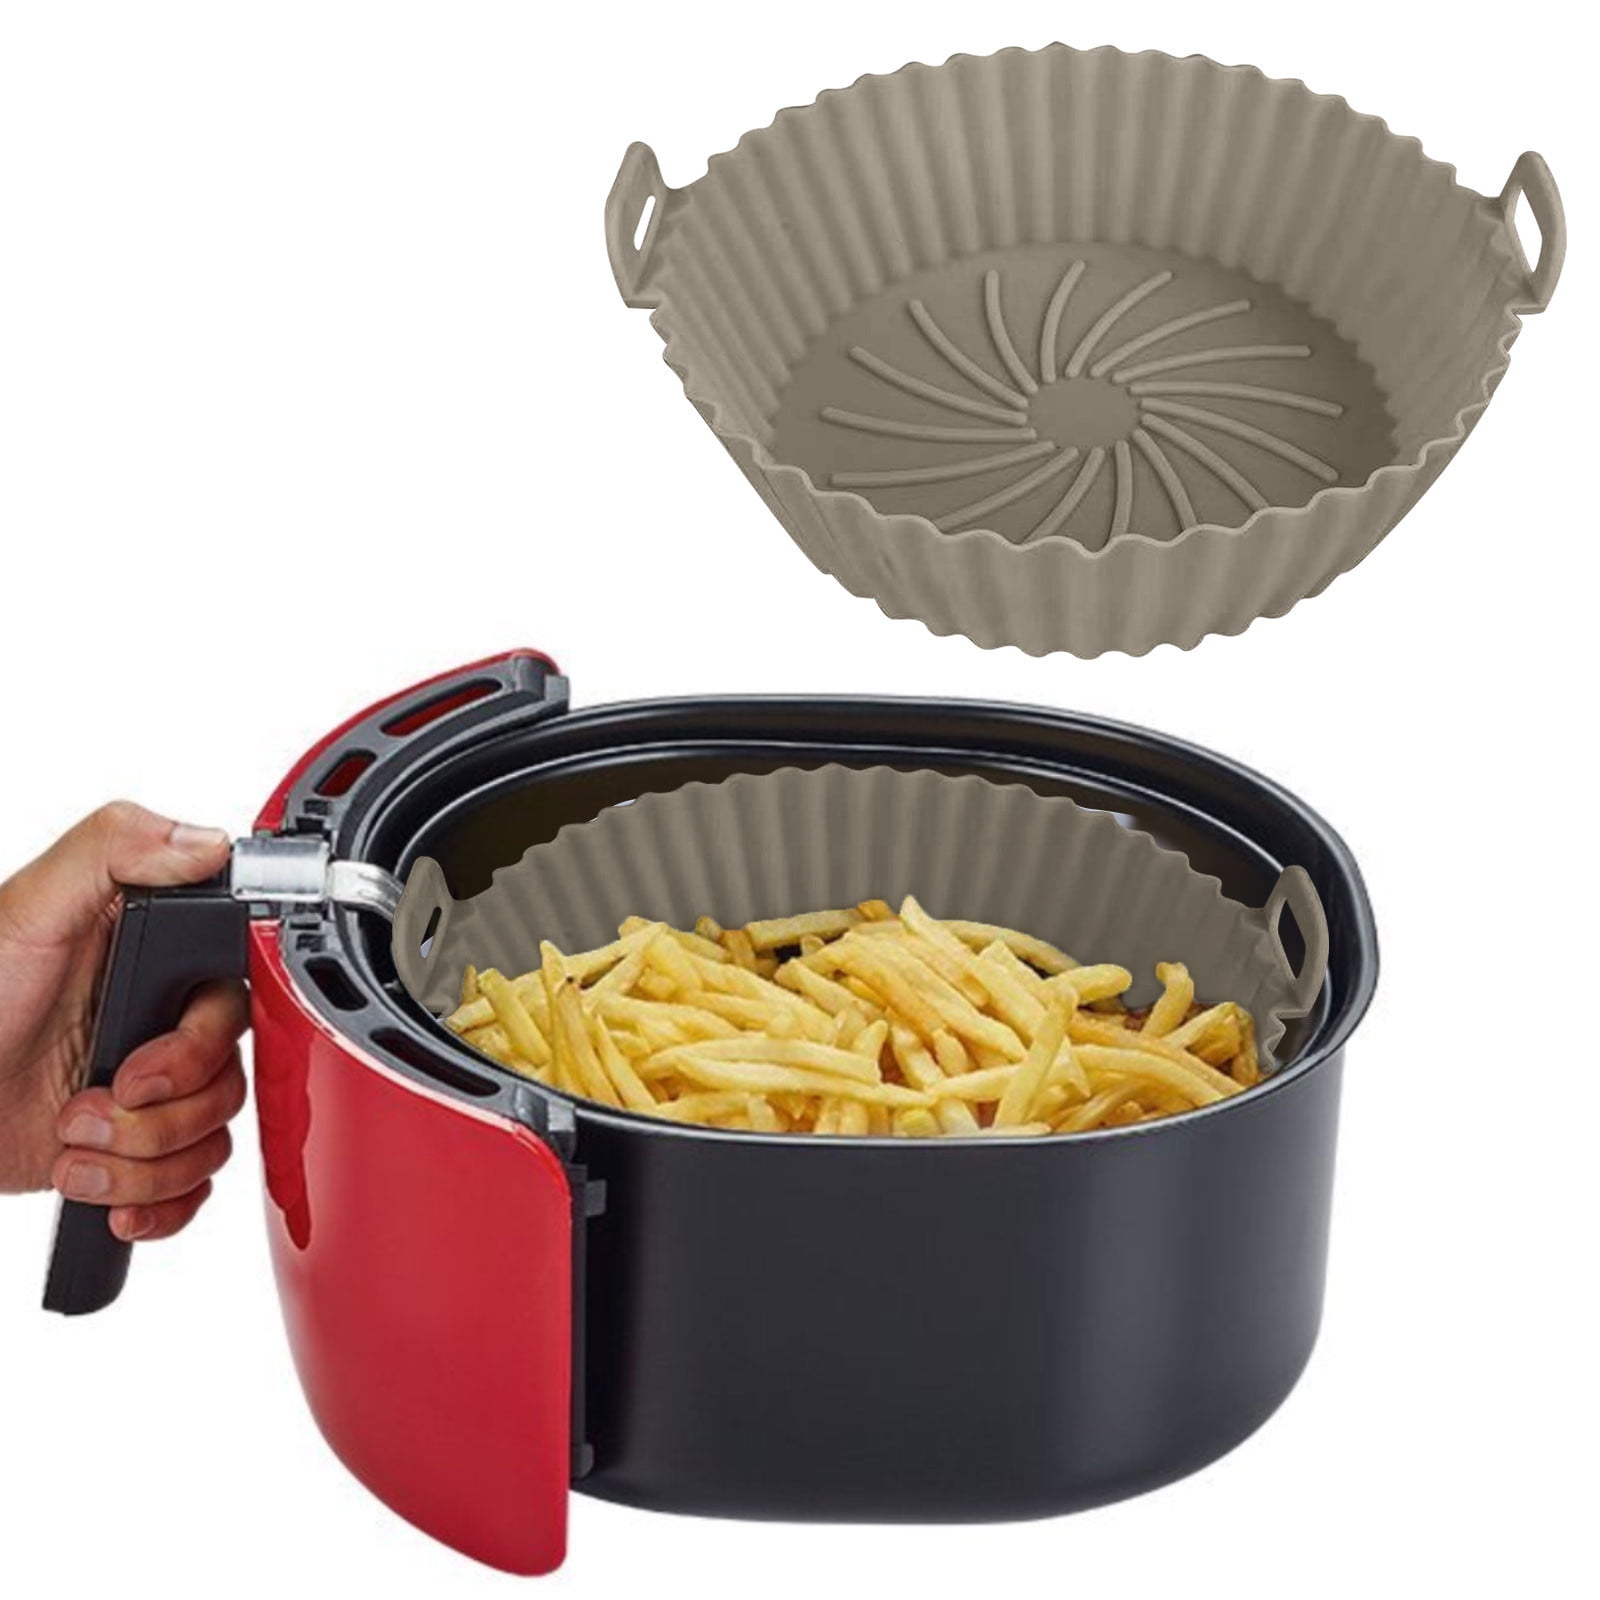 Air Fryer Silicone Pot - Air Fryer Oven Accessories - Replacement for  Flammable Parchment Liner Paper - No Need to Clean the Air Fryer (Top: 6.3